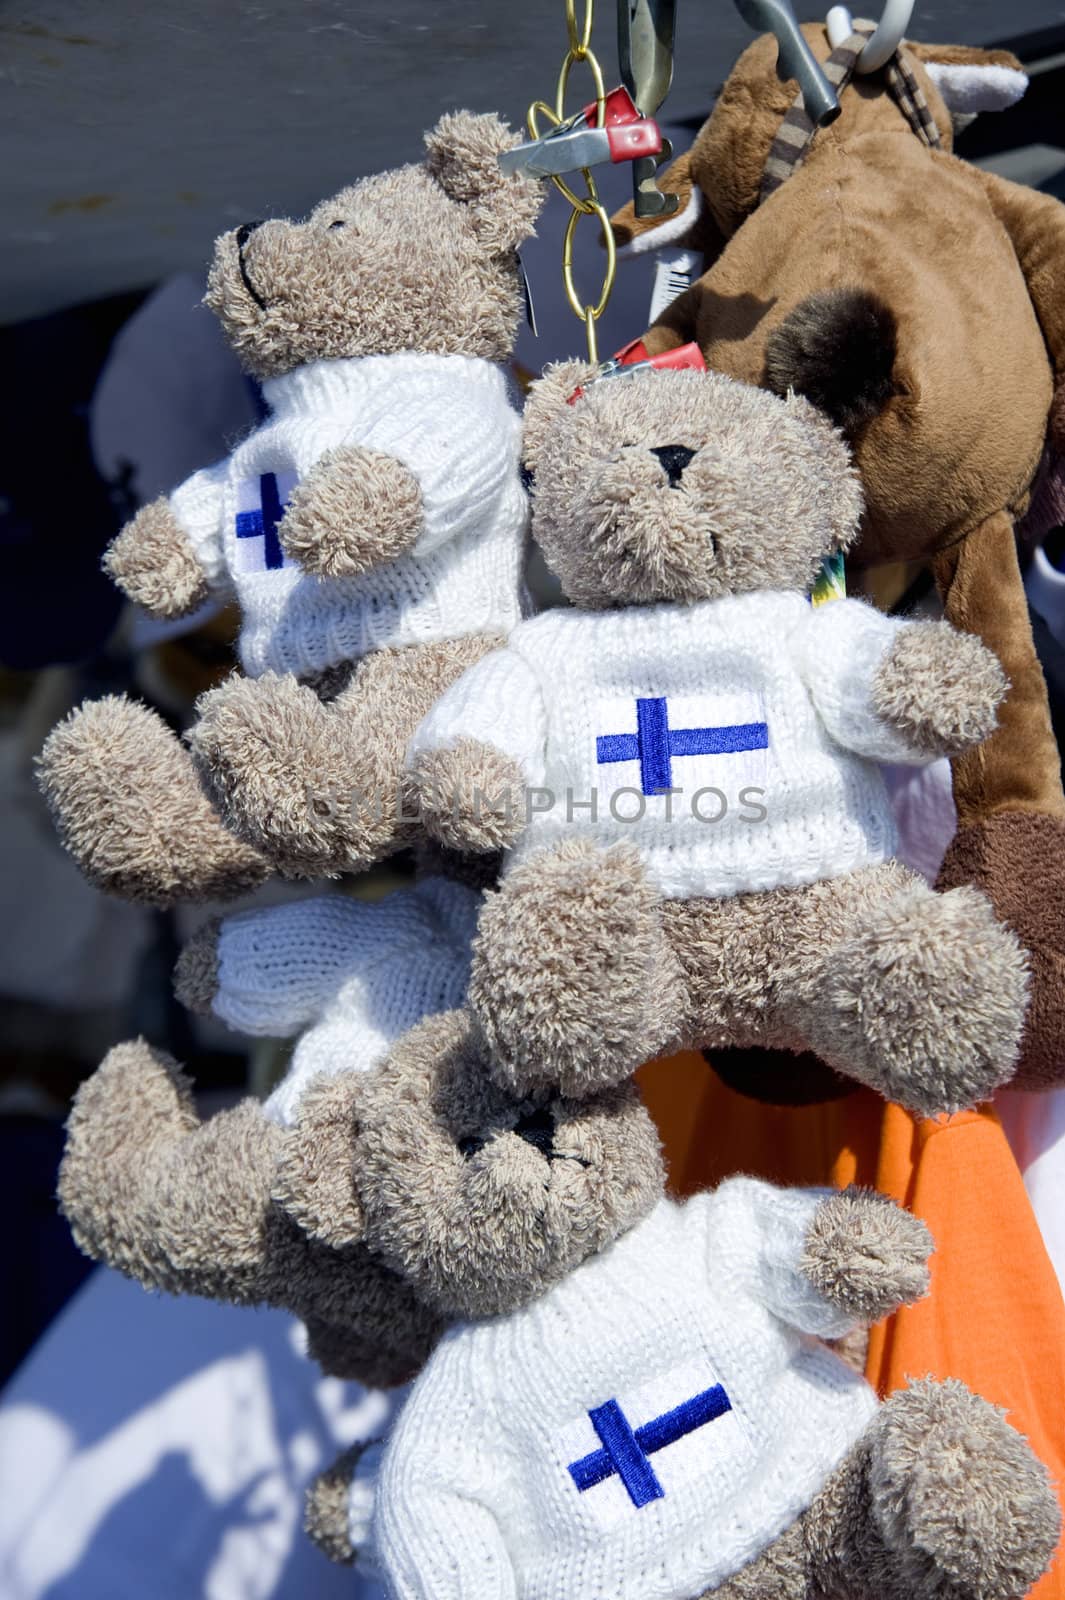 Toy souvenir bears in a bench of gifts in Finland